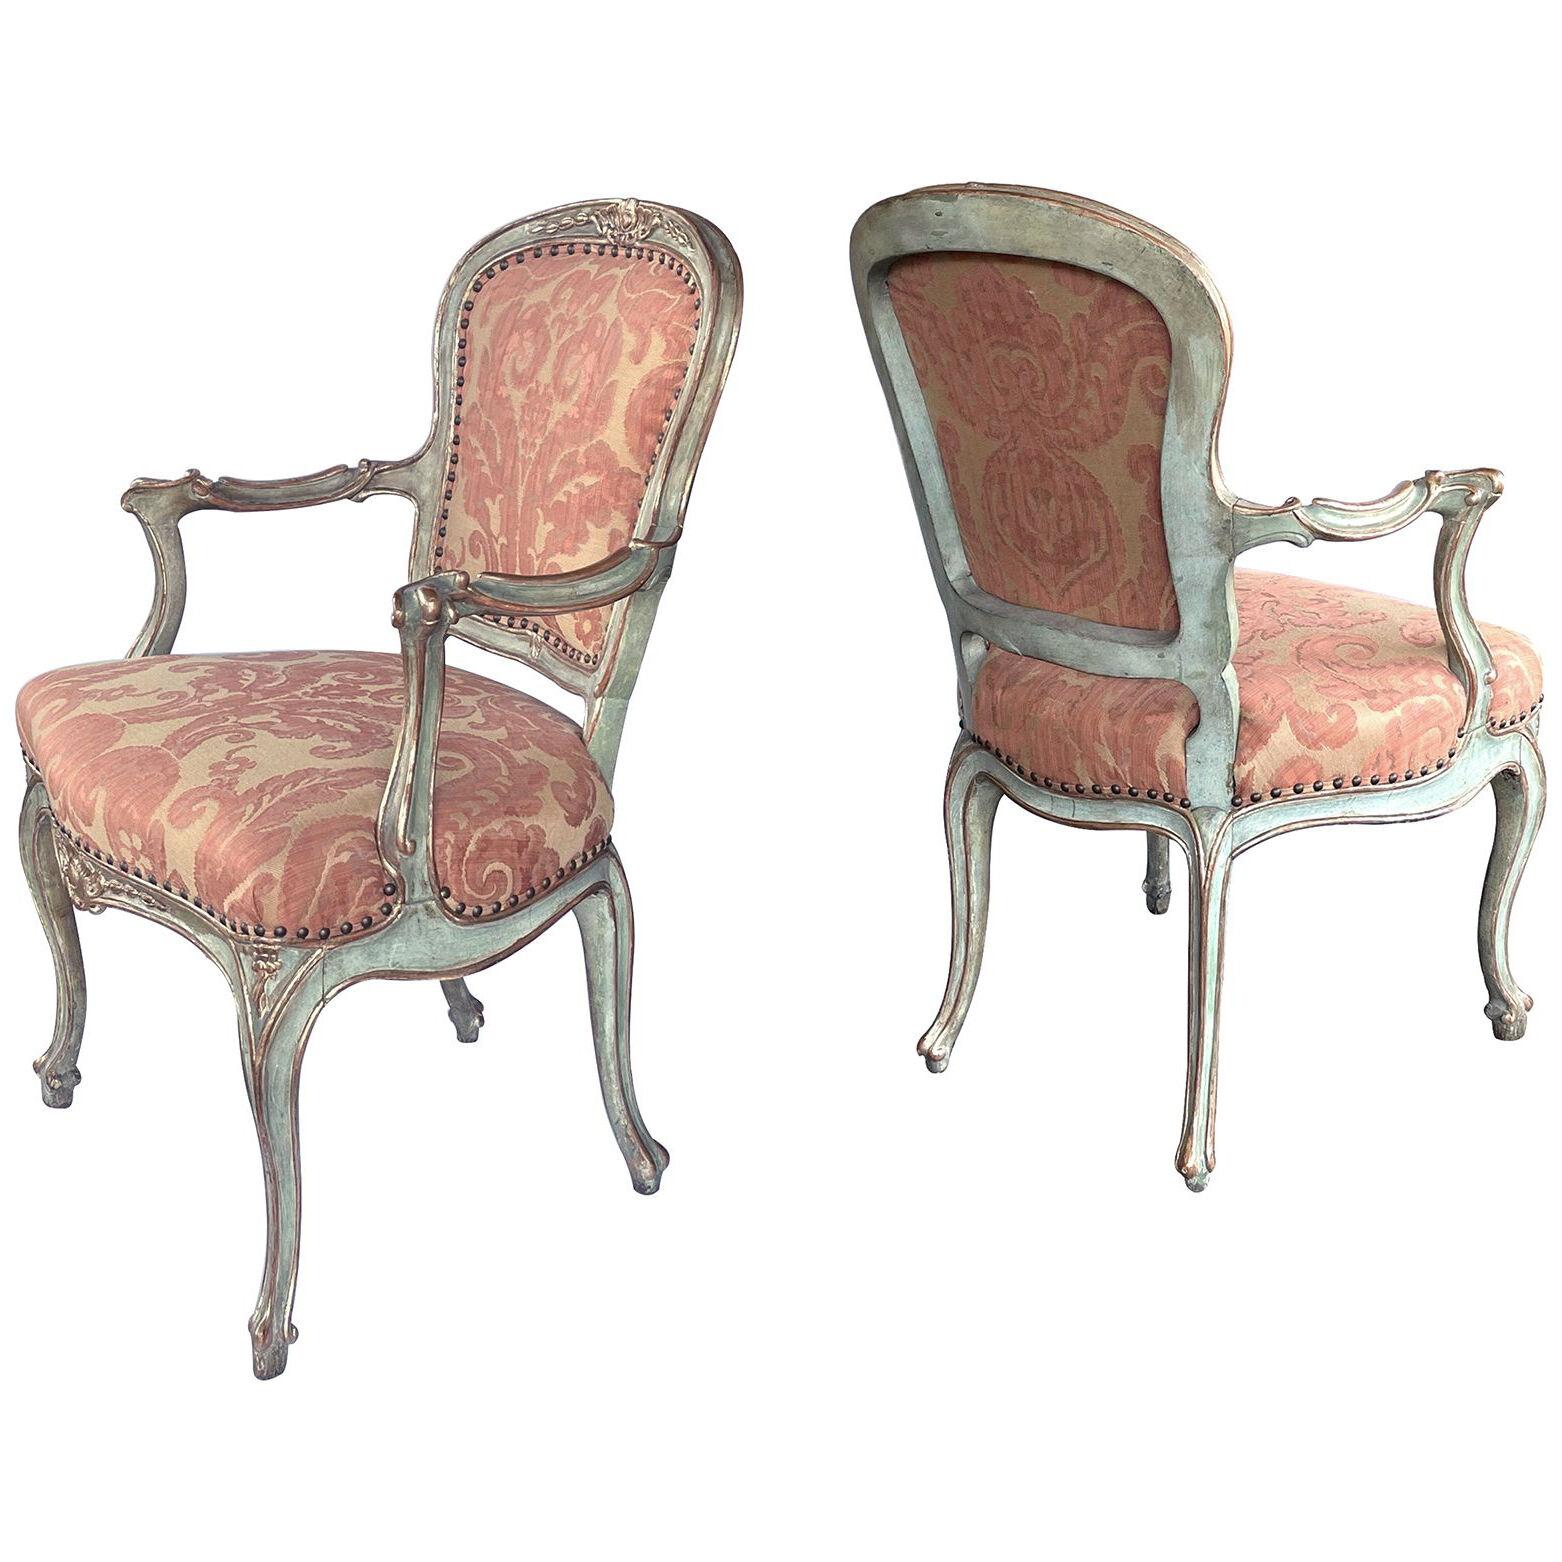 Shapely pair of Italian rococo style aqua painted and parcel-gilt armchairs